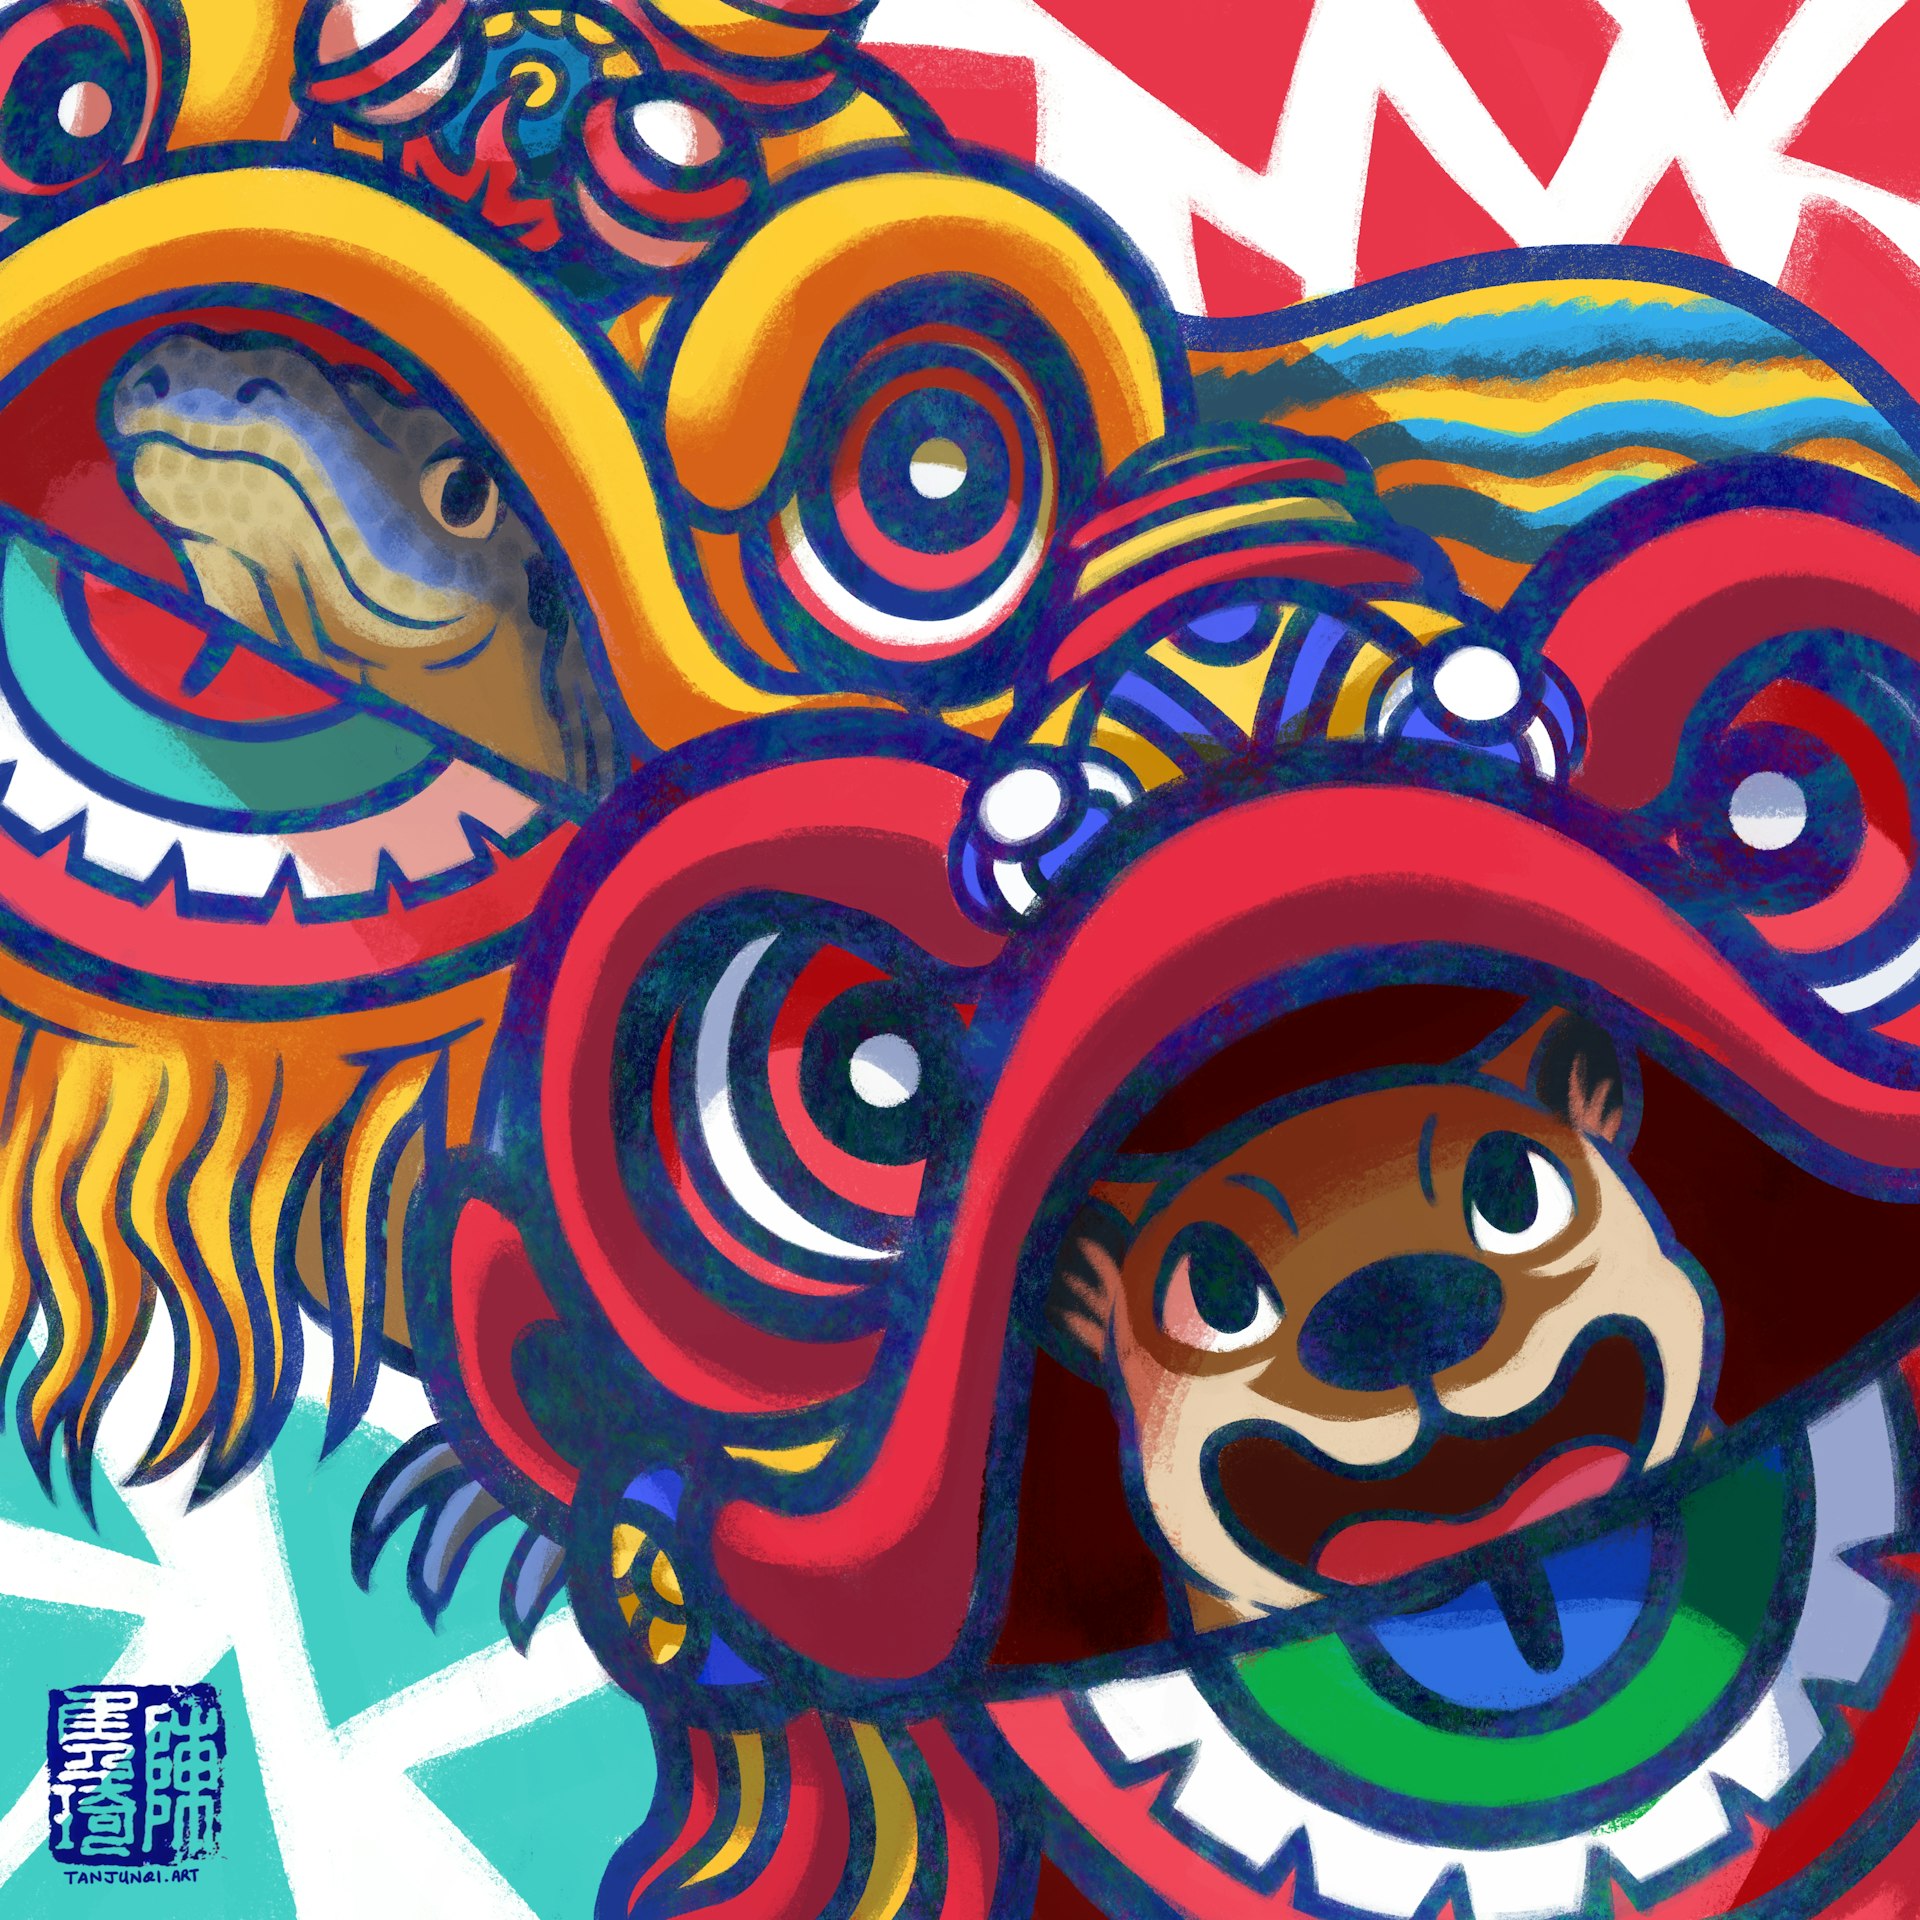 Digital painting of Mr Otter and Ms. Water Monitor doing the Southern Lion Dance. Style is bright, graphic, with vivid colors, thick outlines and geometric shapes.